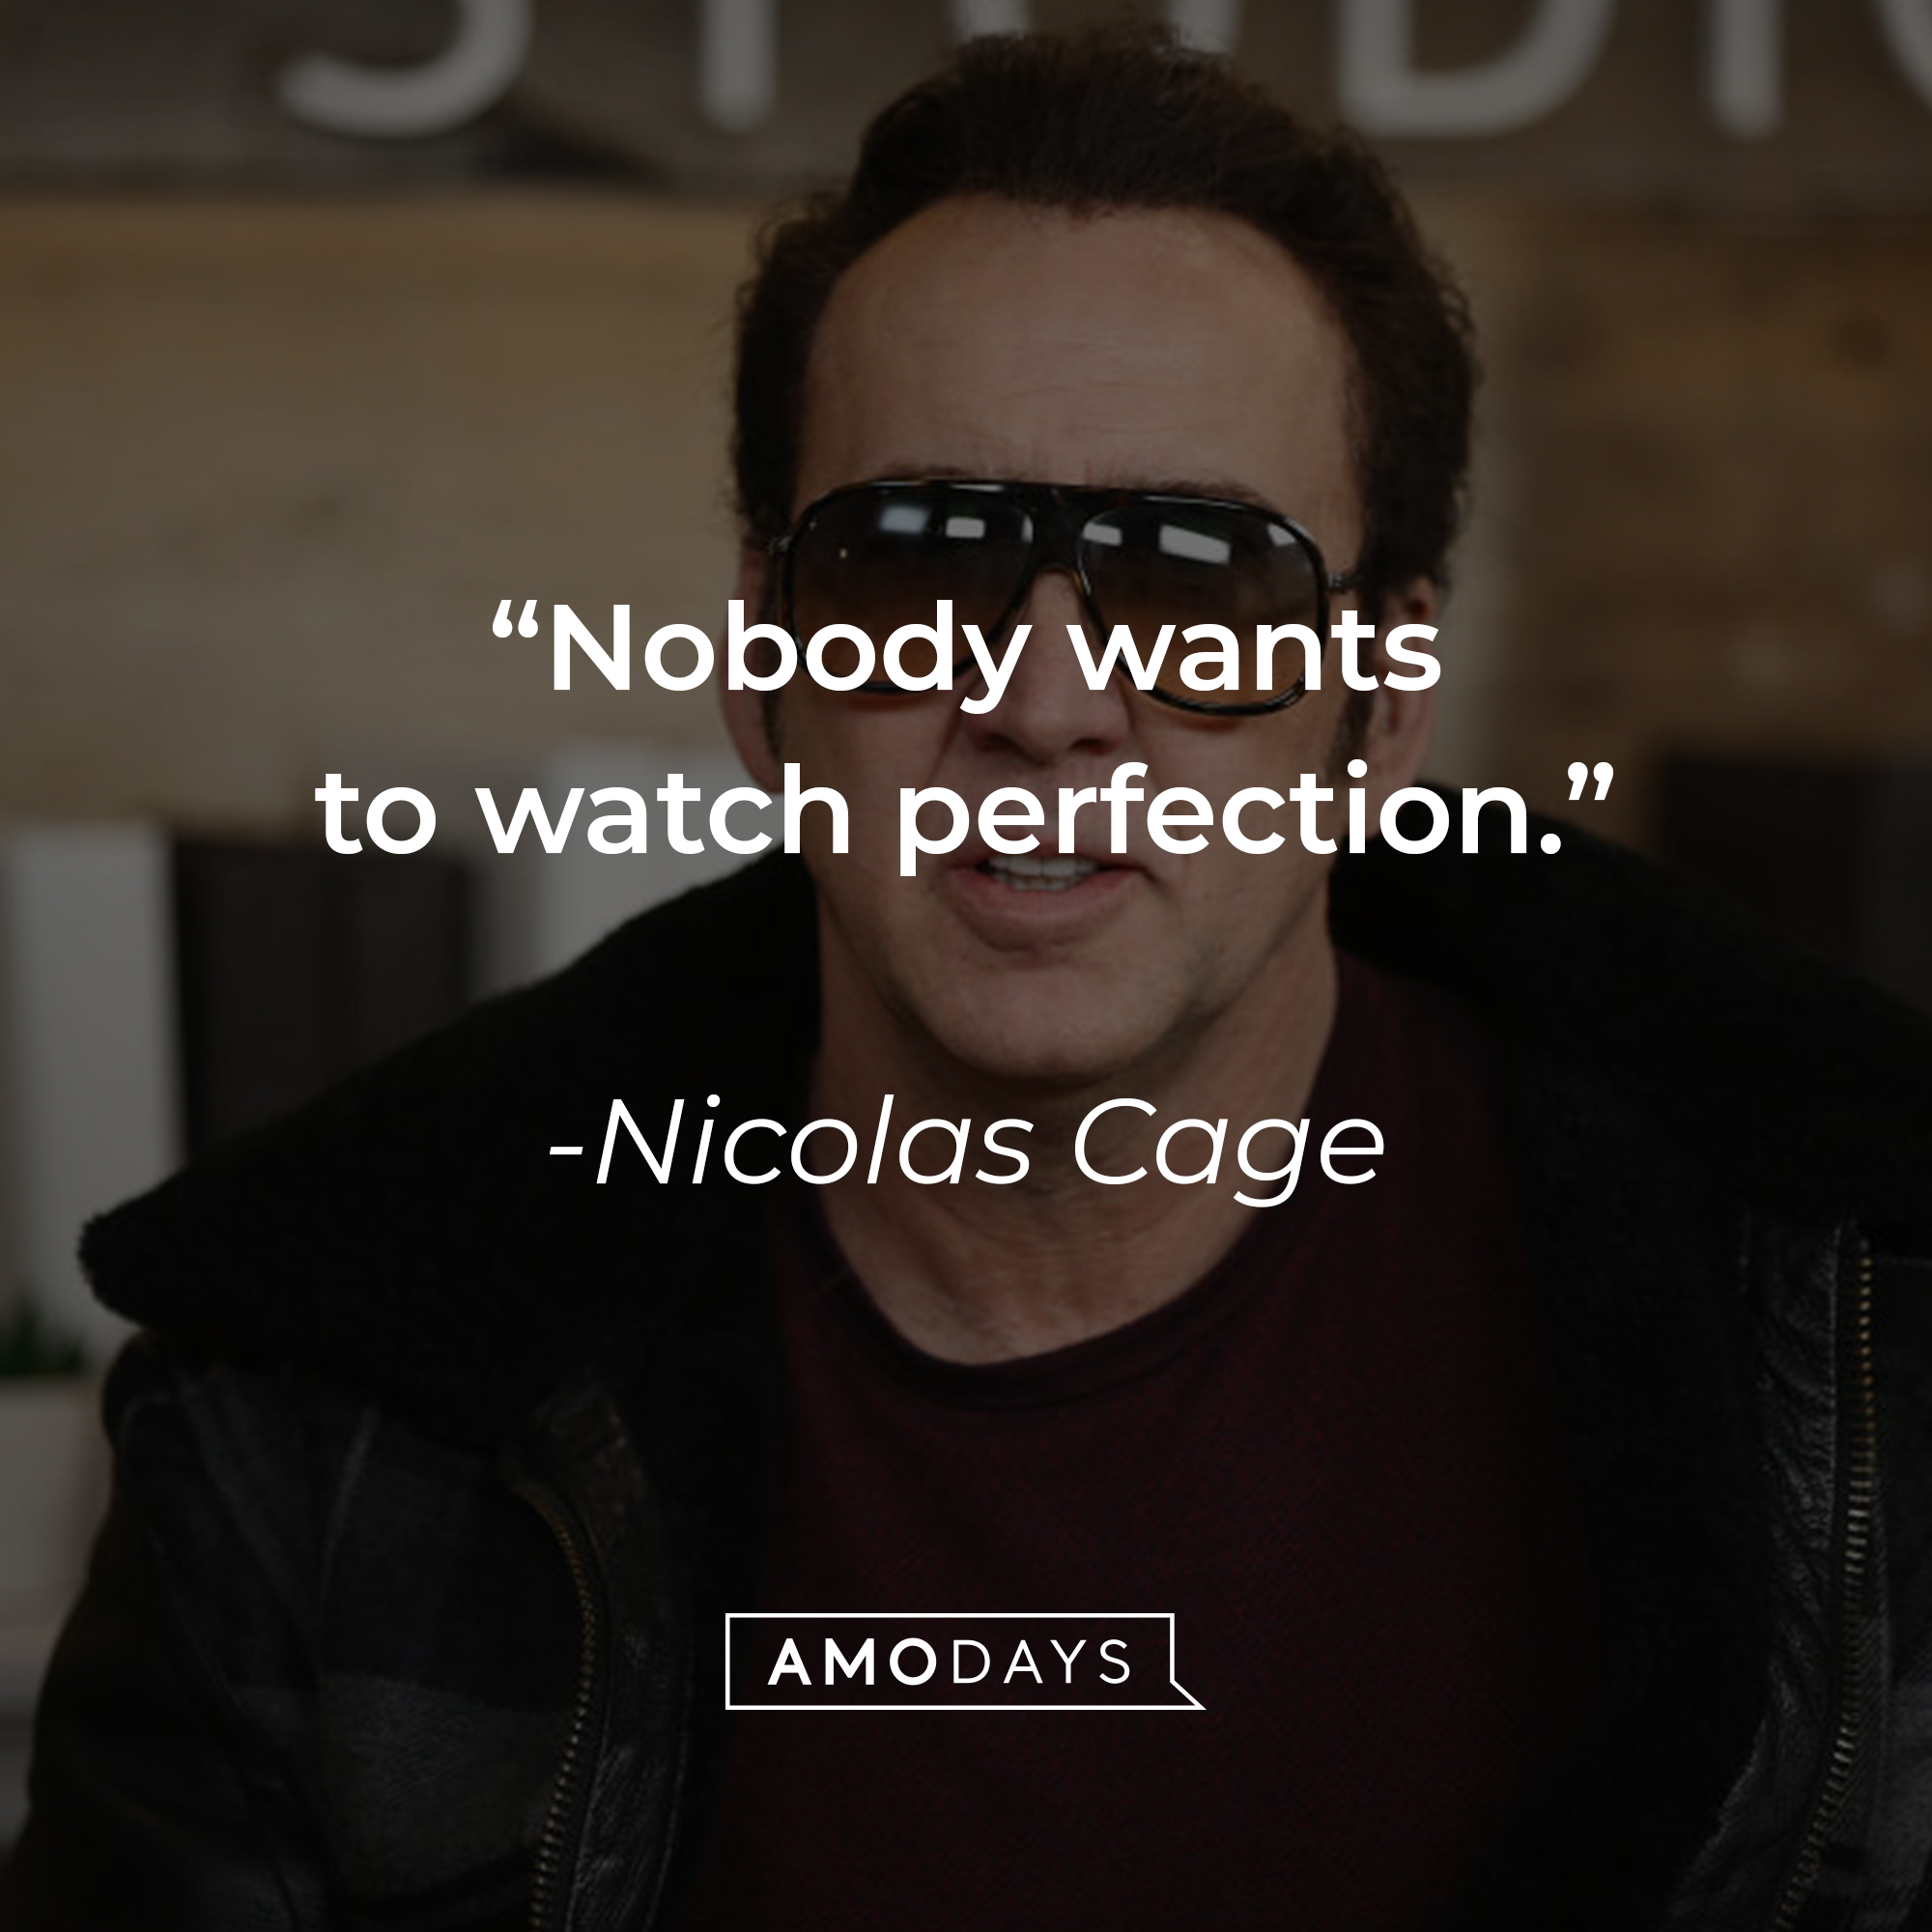 Nicolas Cage's quote: "Nobody wants to watch perfection." | Source: Getty Images